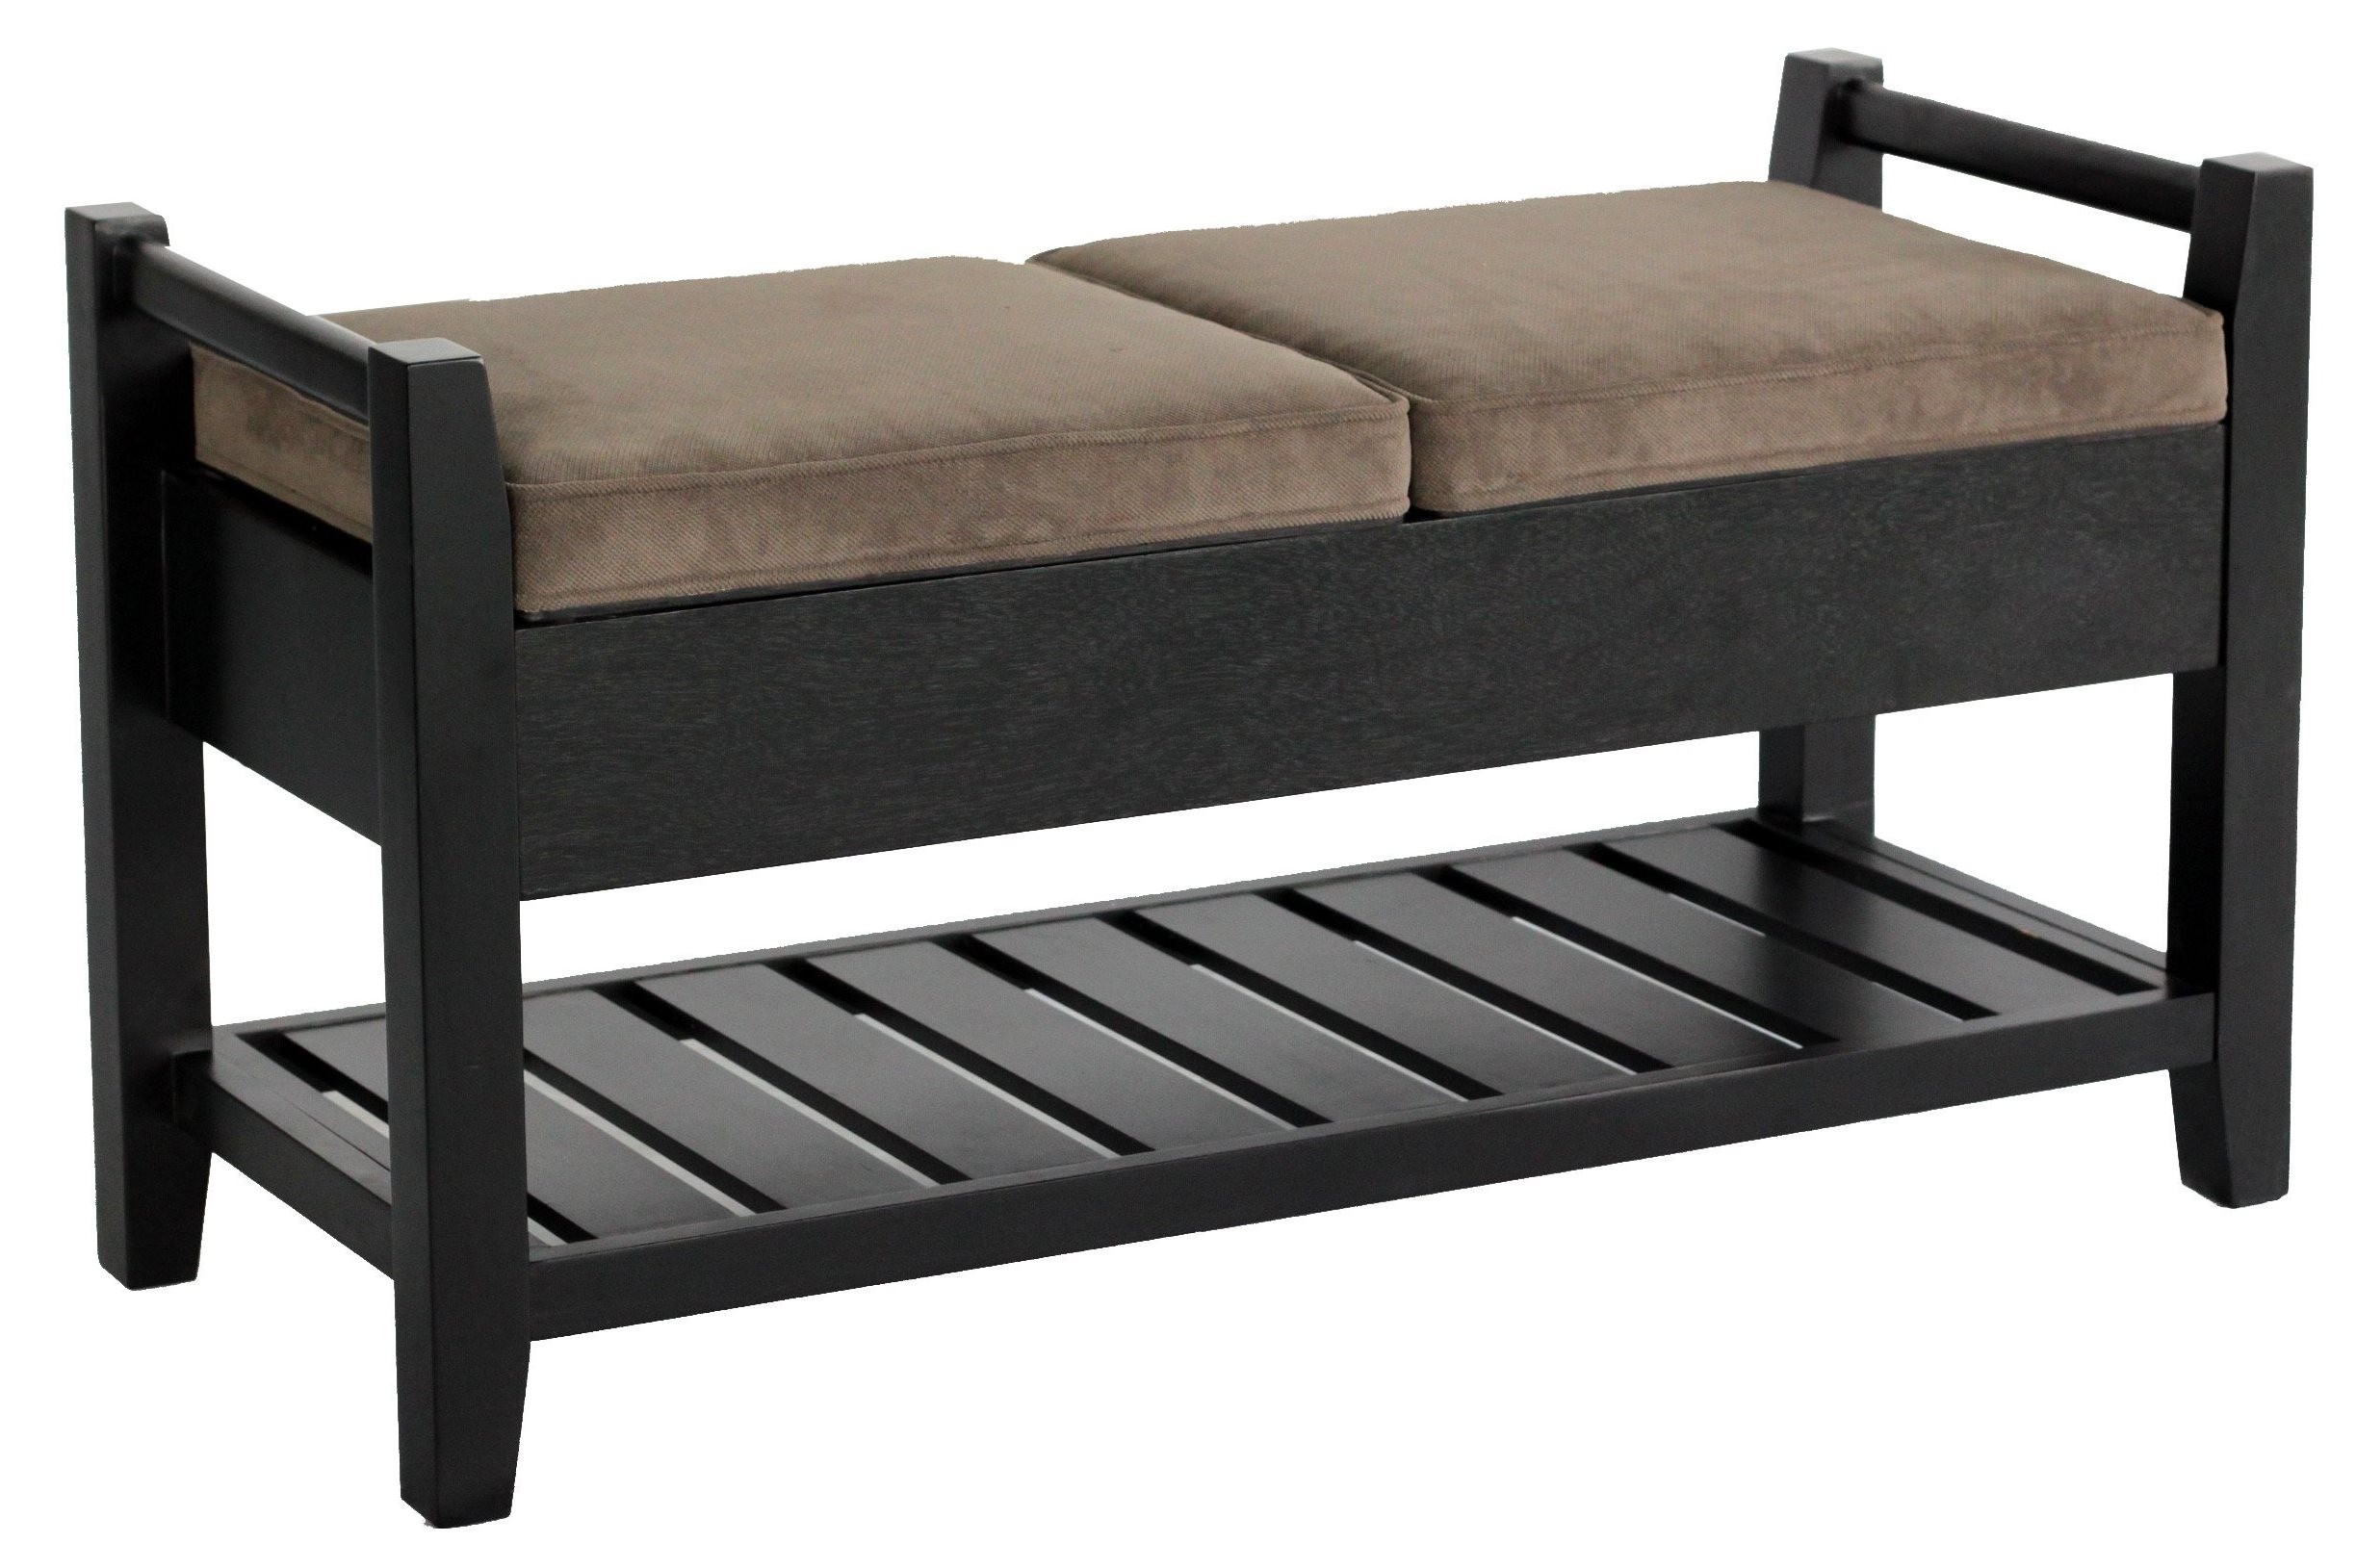 Adorning bedroom with bed ottoman bench homesfeed 3